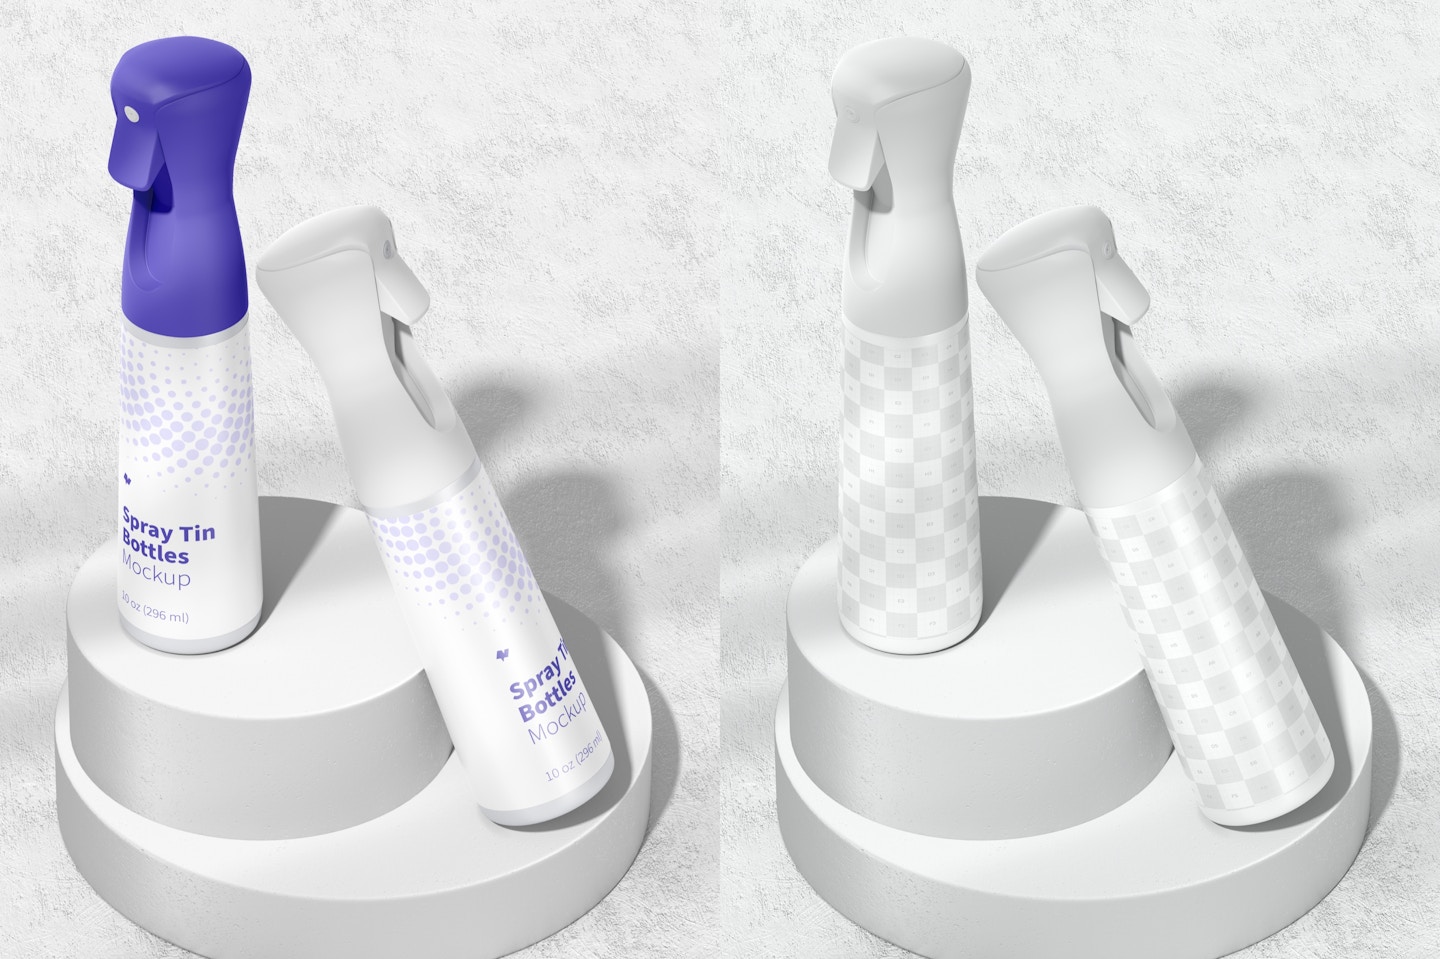 Spray Tin Bottles Mockup, Perspective View